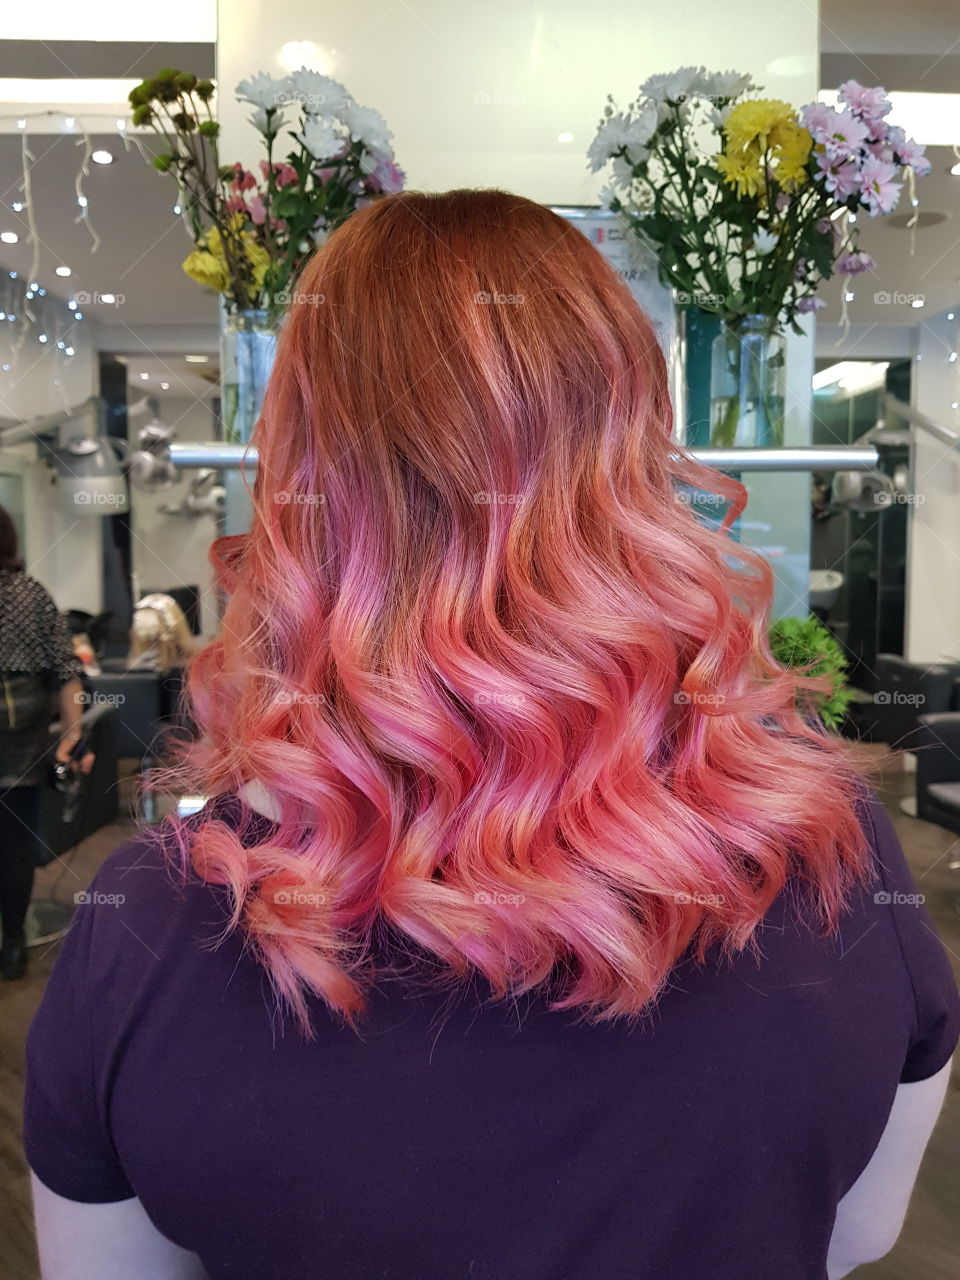 pink long curly hair balayaged fashion techniques trendy different unusual